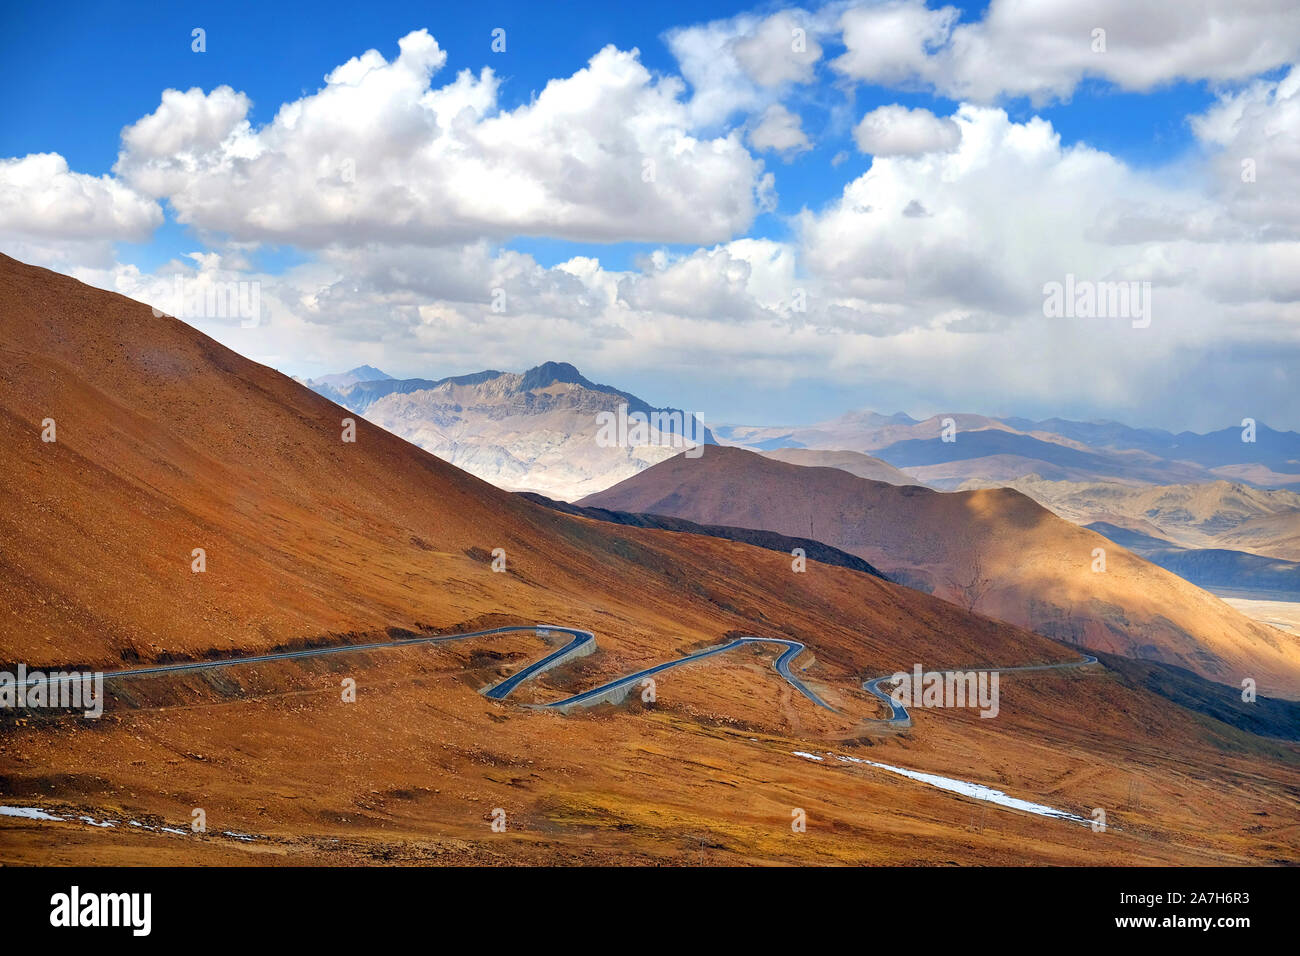 Highway stretching across the brown Himalaya Mountains, against a blue sky covered by white clouds. Stock Photo